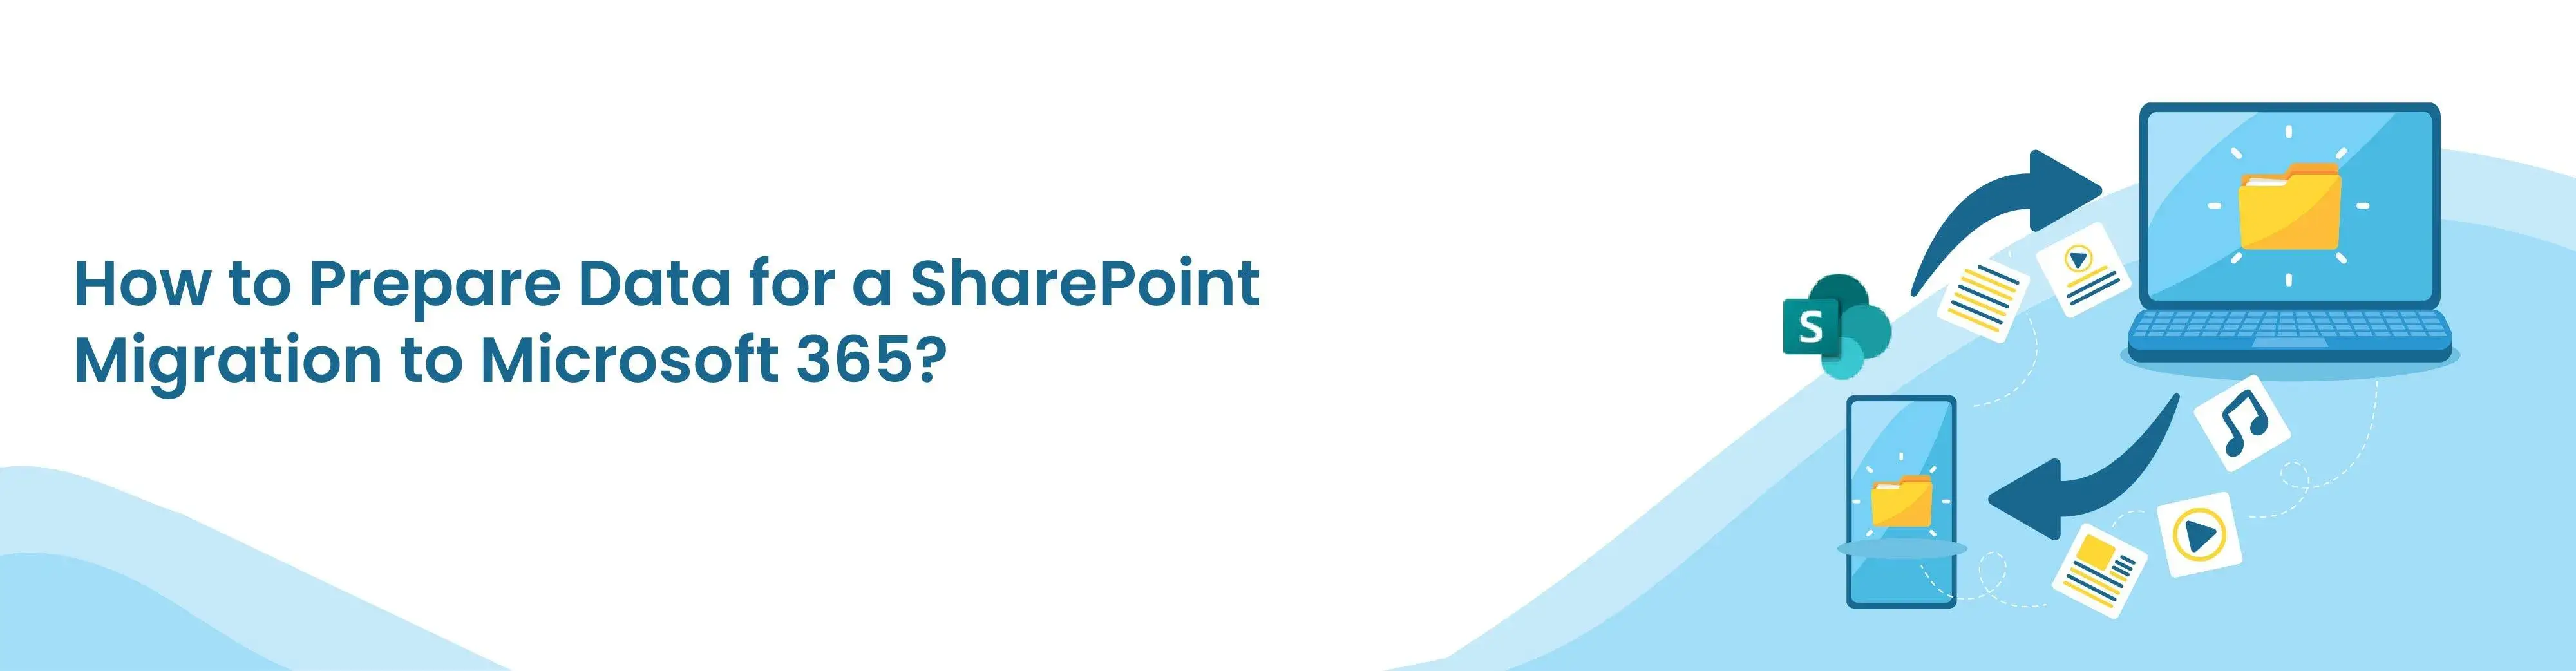 How to Prepare Data for a SharePoint Migration to Microsoft 365?